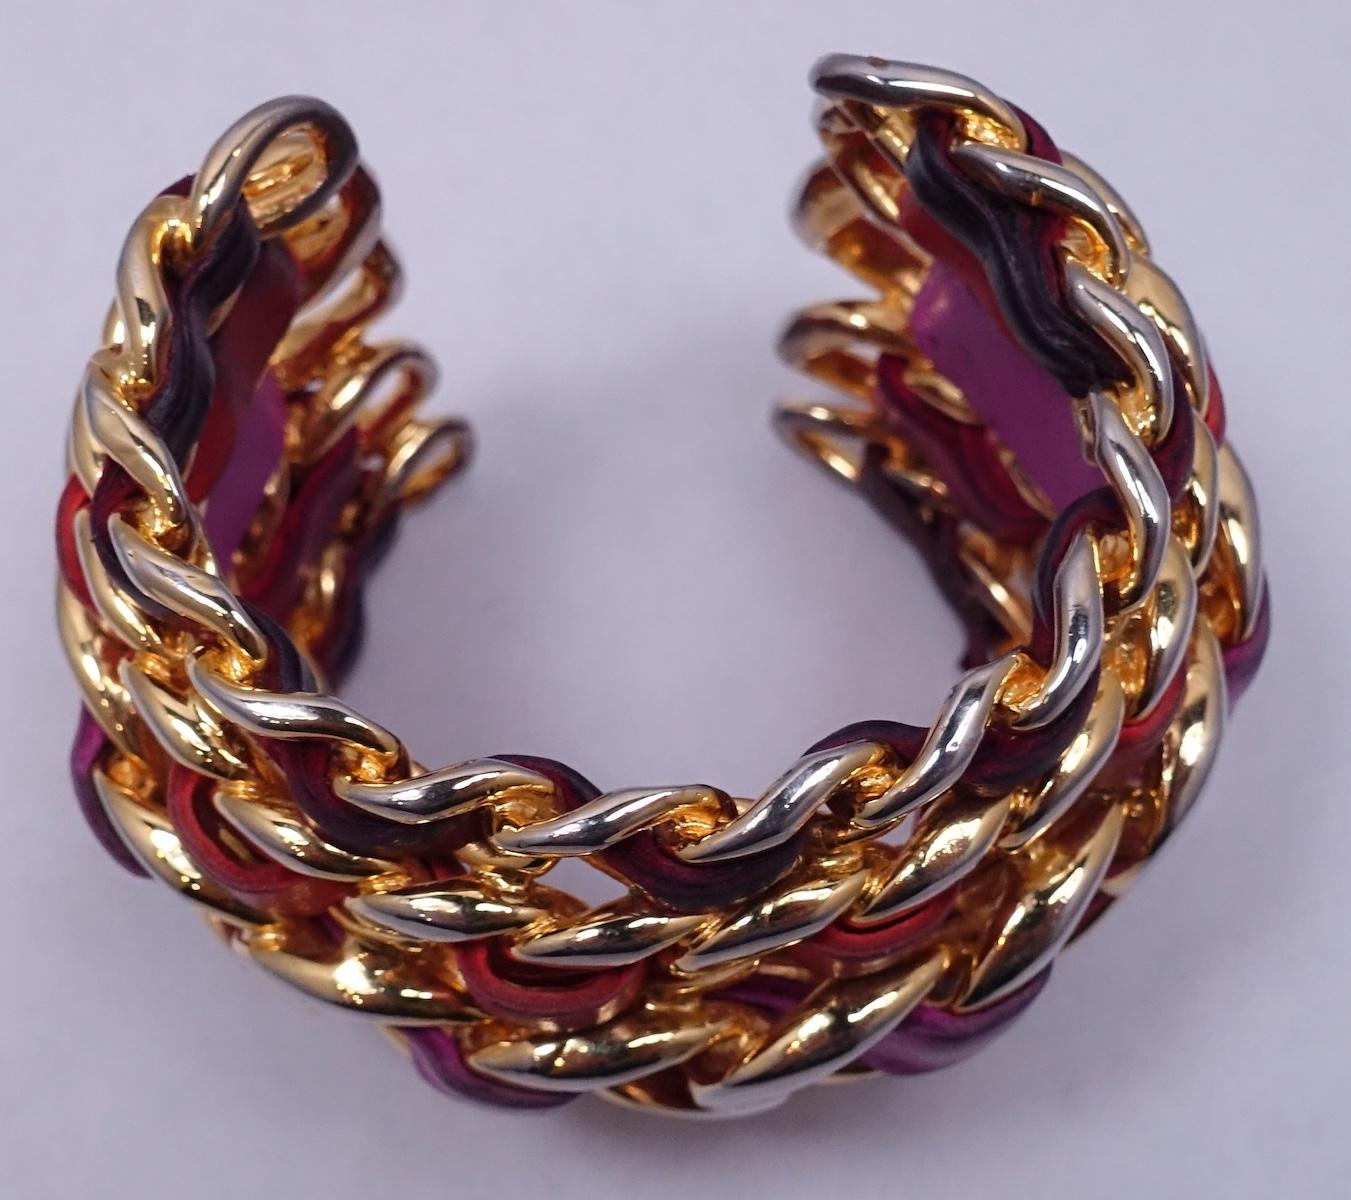 This vintage Chanel runway cuff bracelet has five rows of interweaved lambskin leather in a gold tone and polychrome setting.  The leather colors are lavender, fuchsia, coral and burgundy.  In excellent condition, this cuff is signed “Chanel 26 Made